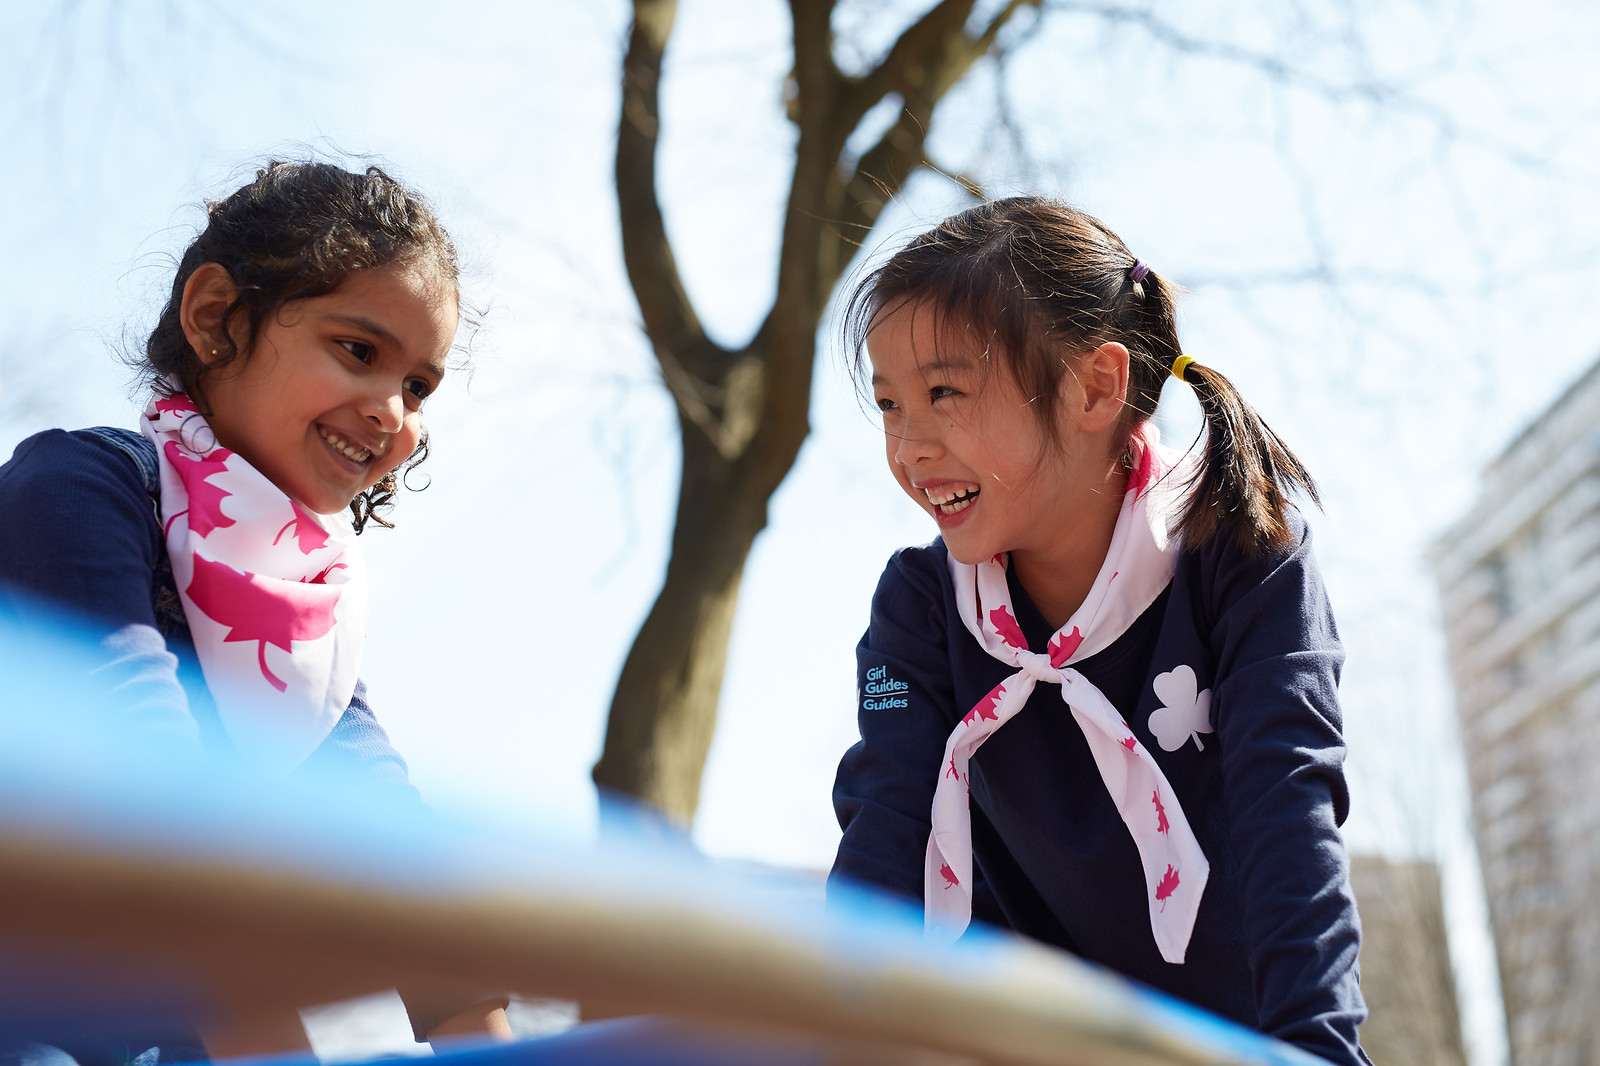 Two Girl Guides aged 5 to 6 smiling and playing together outside